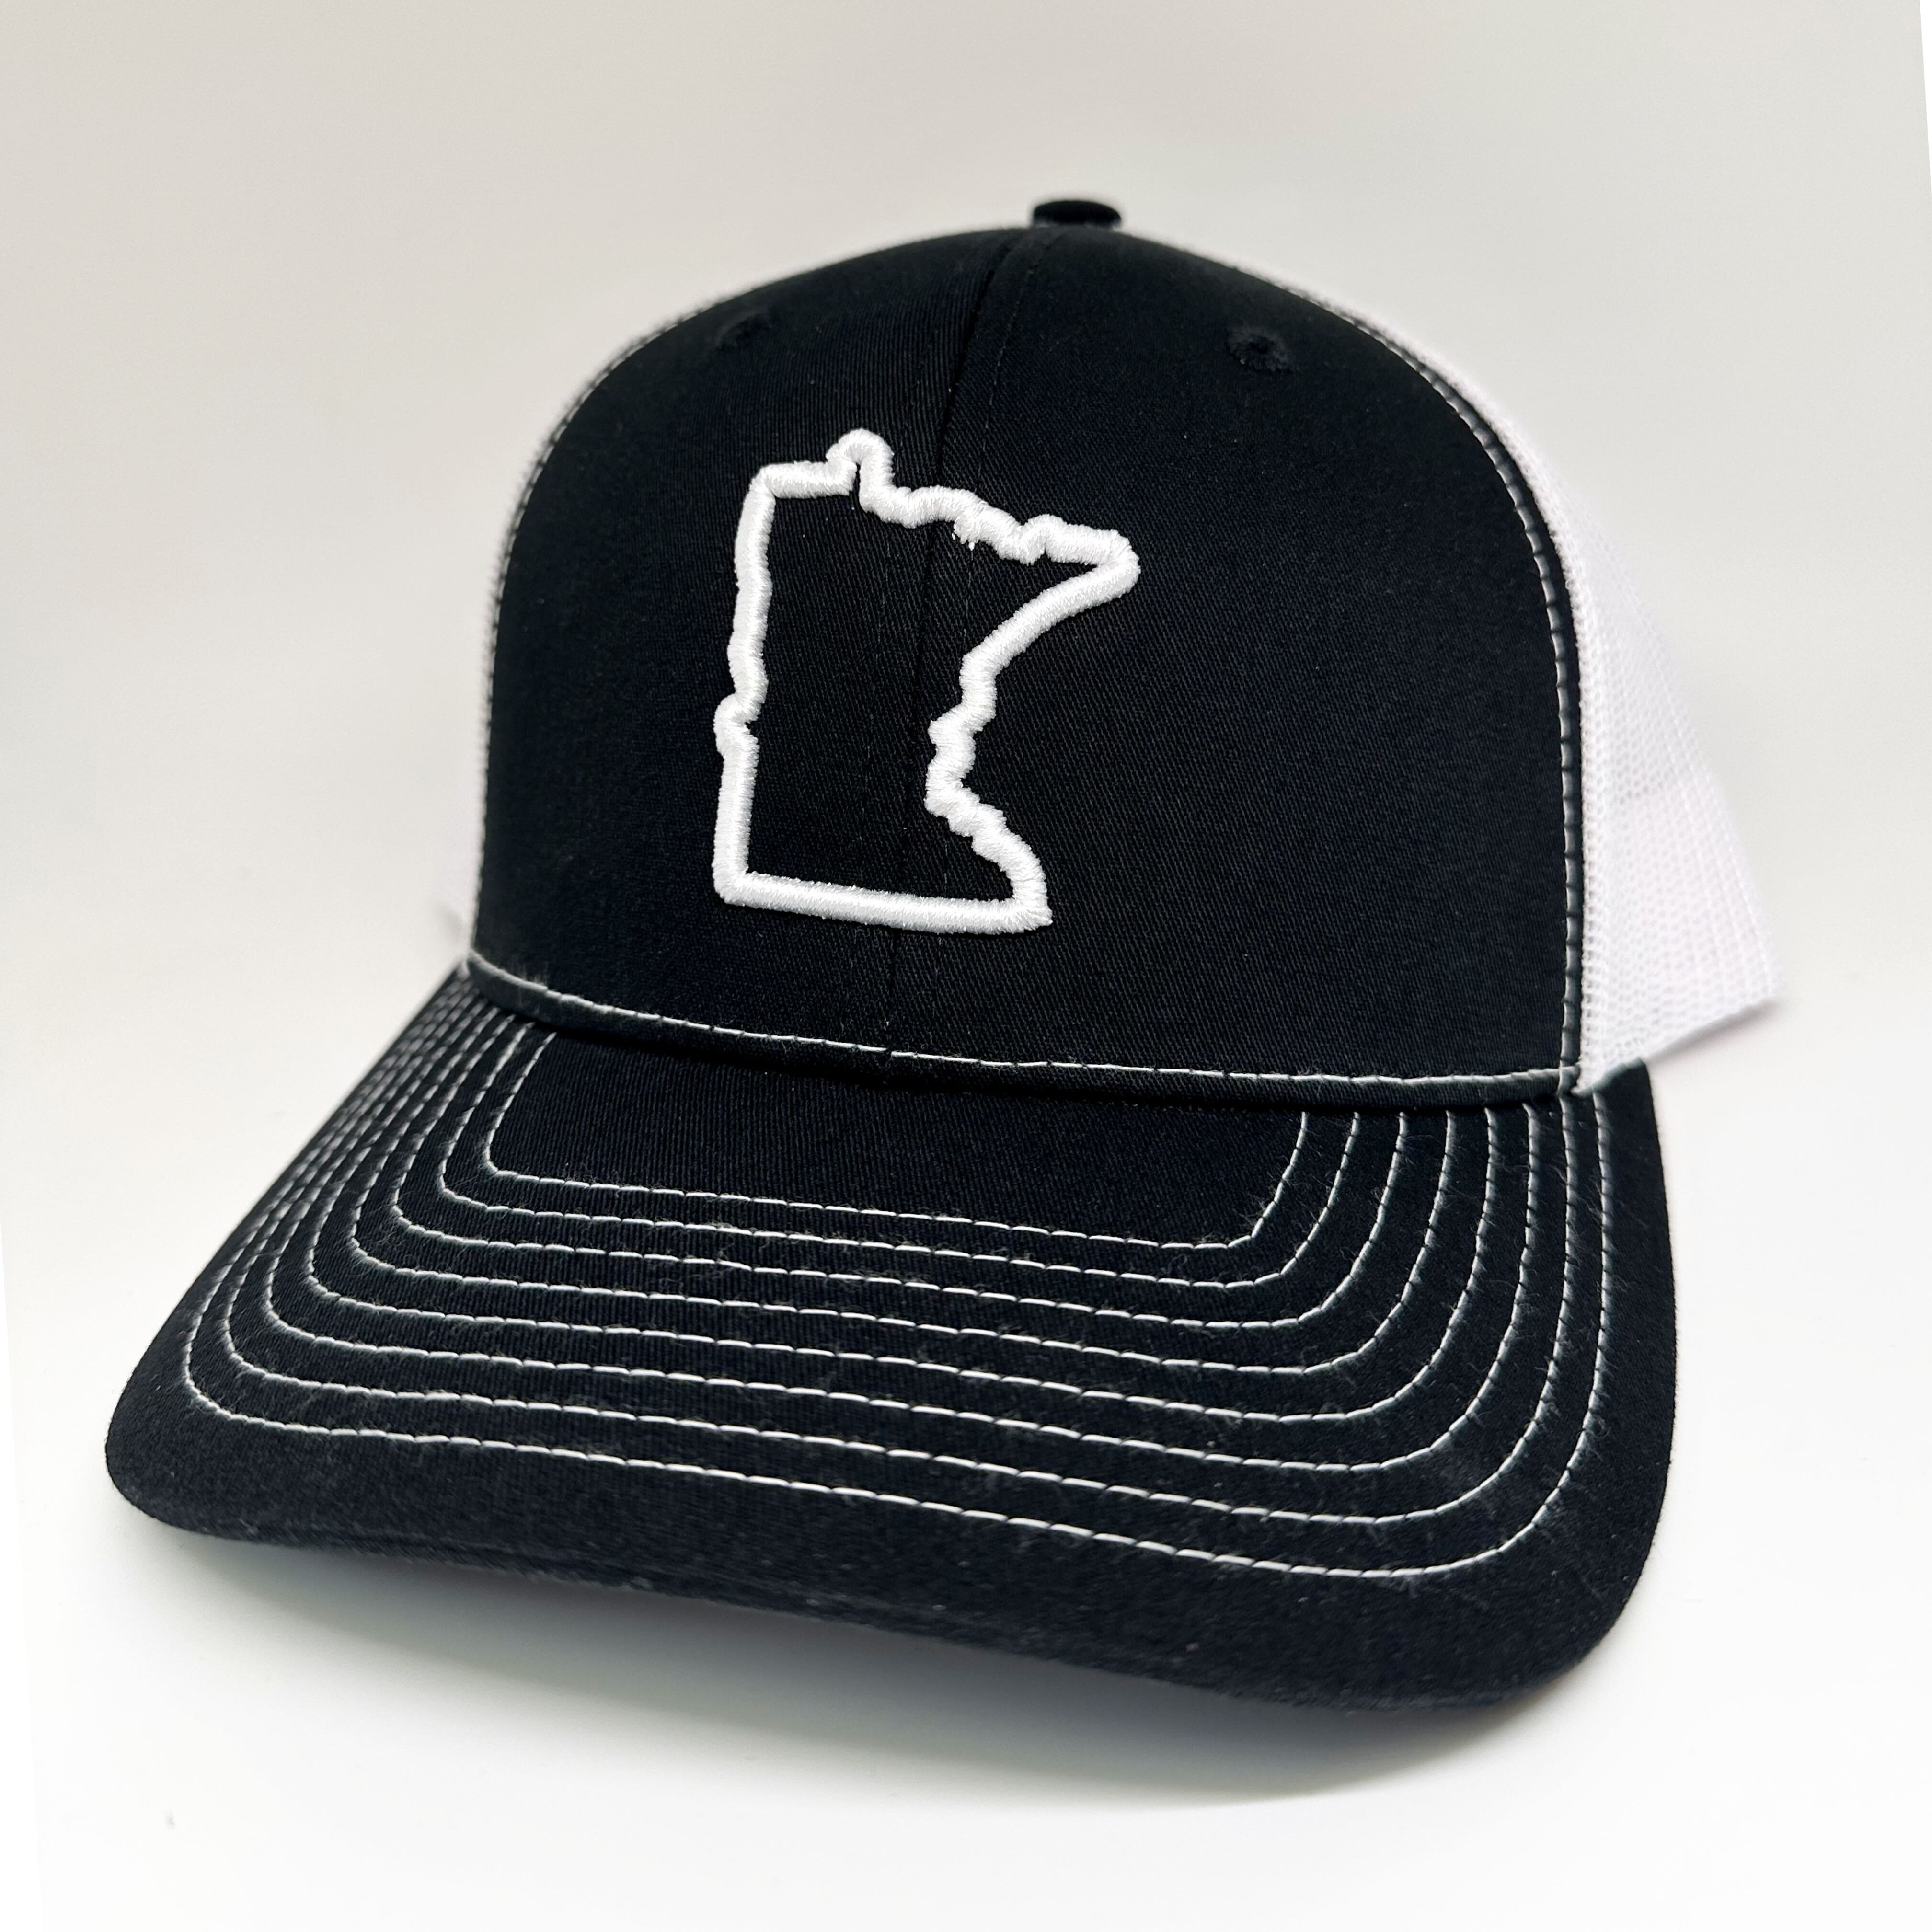 Thumbnail for Minnesota Embroidery Hat - Greater Half